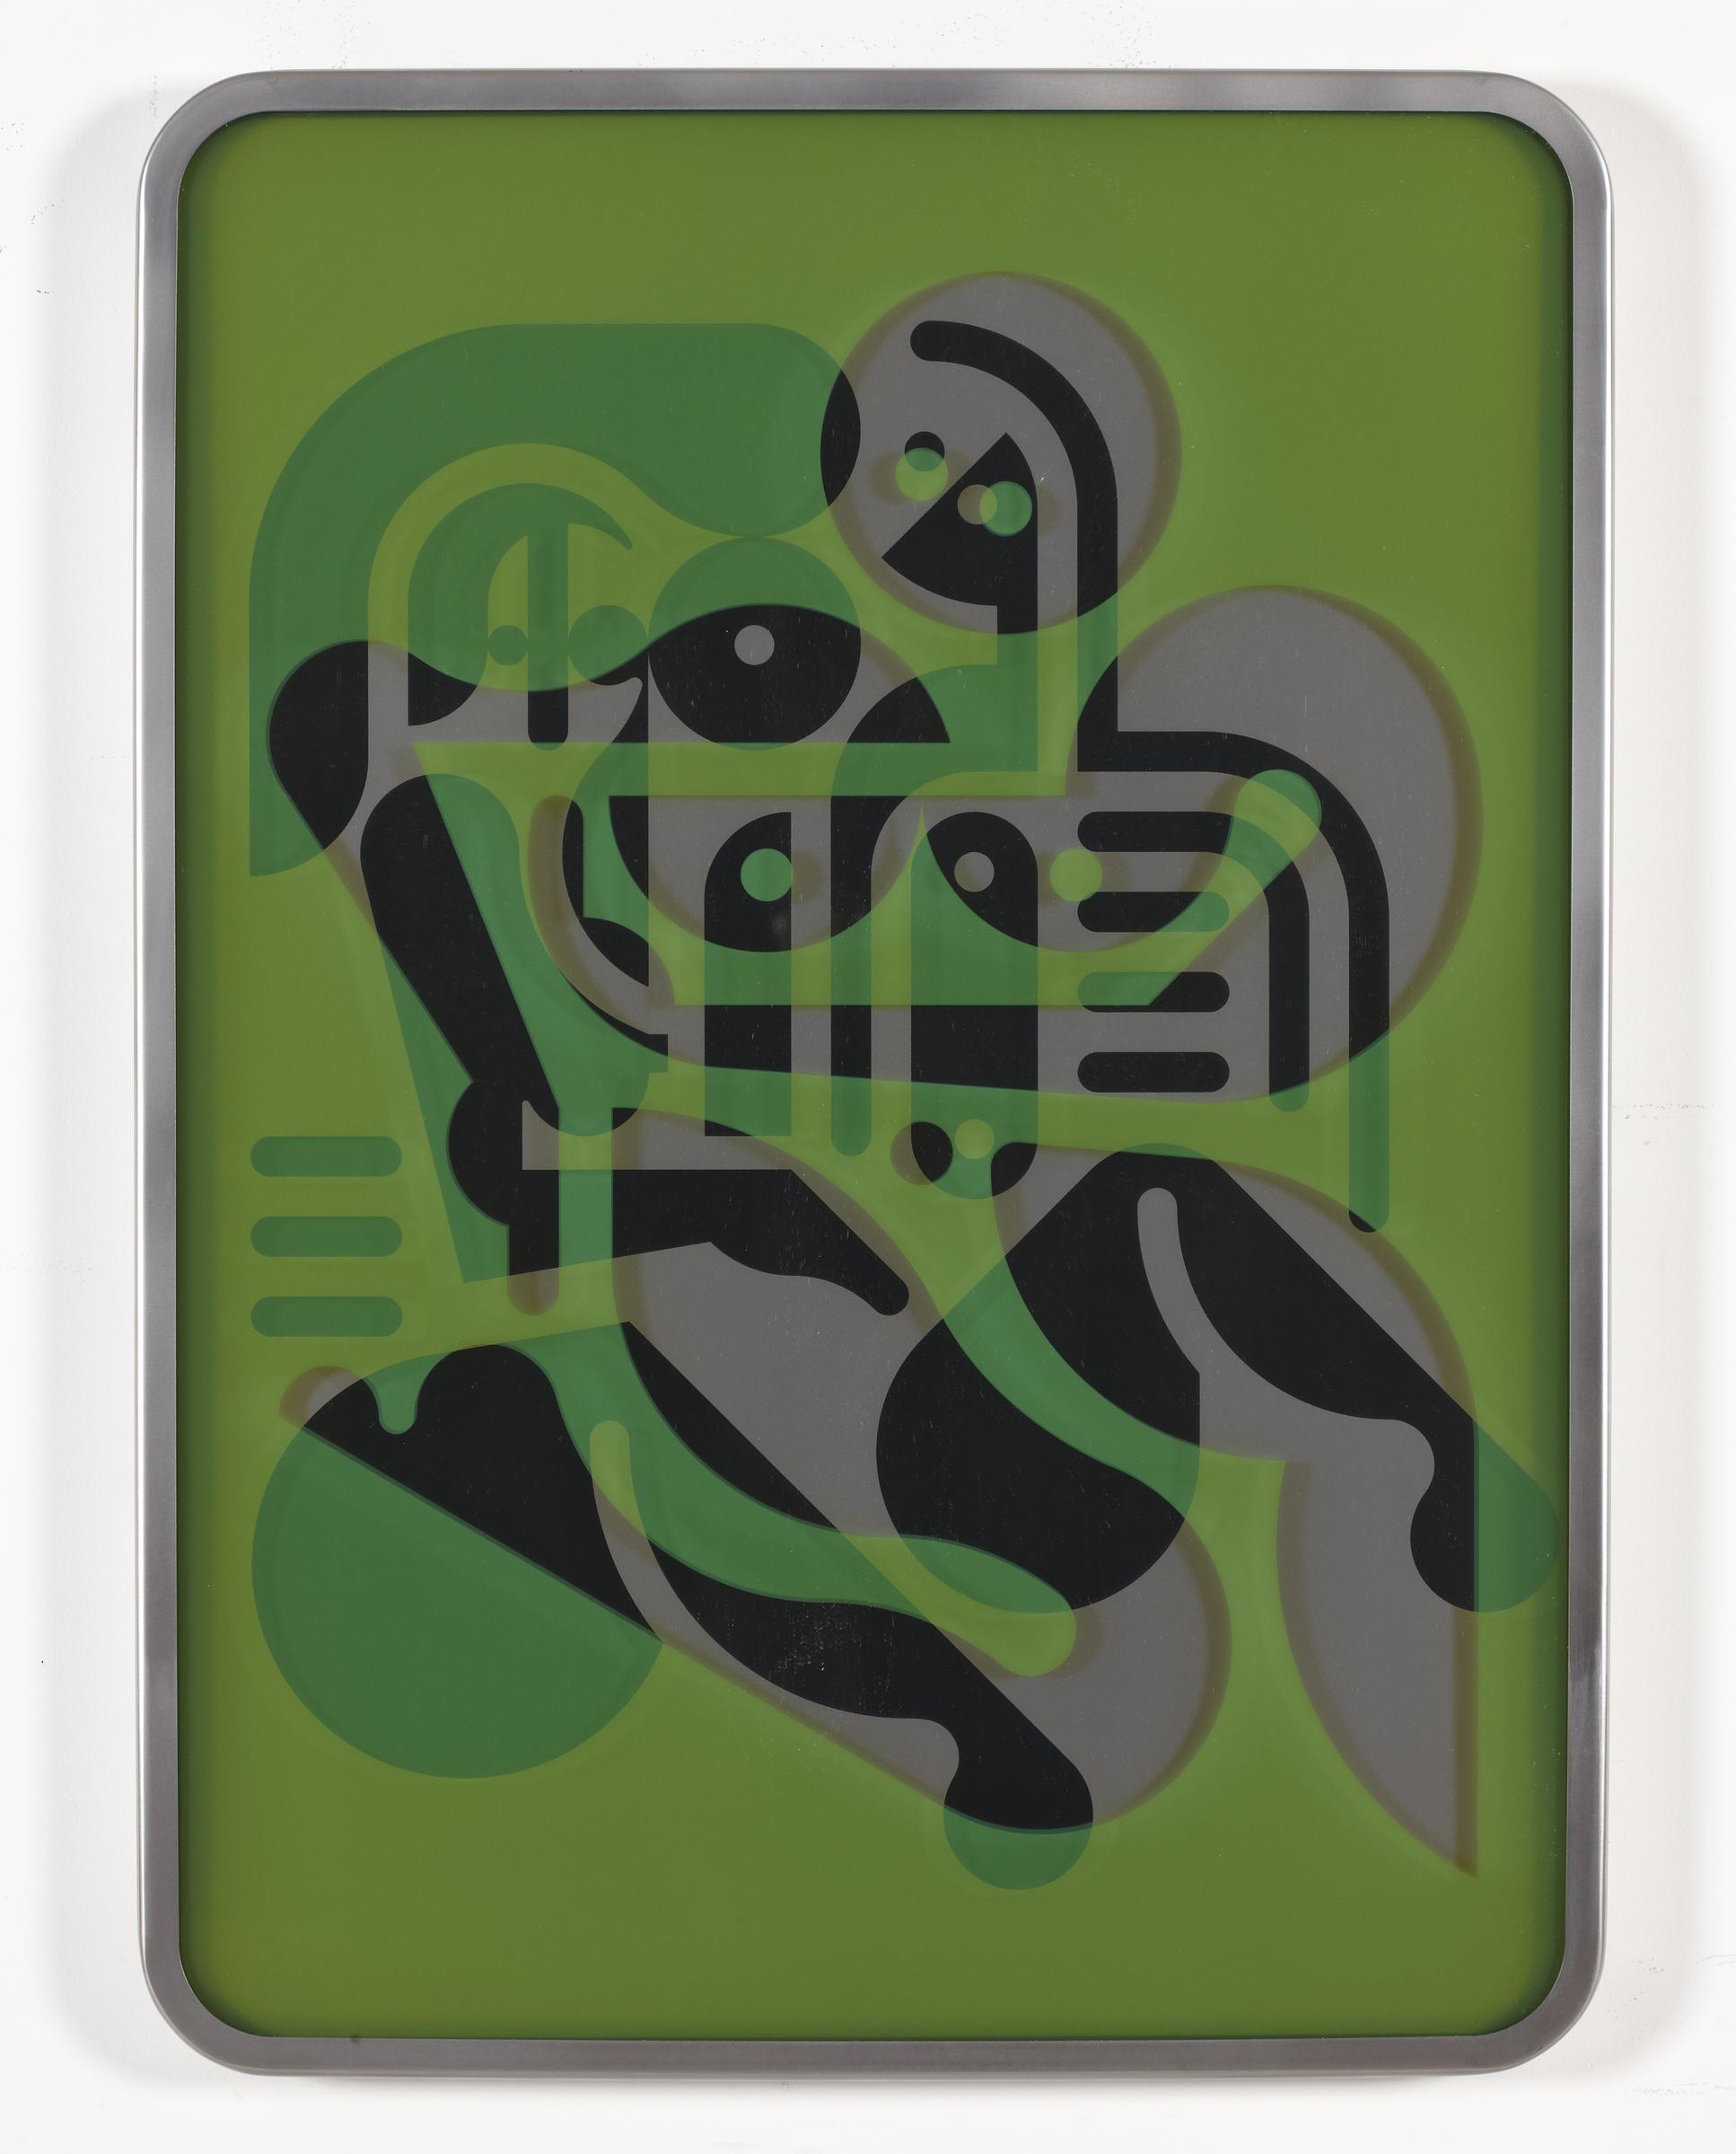 RYAN McGINNESS
Women (Forms + Surfaces 8), 2012
Etched mirror polished stainless stealing colored glass
30 1/4 x 22 inches
SGI3330